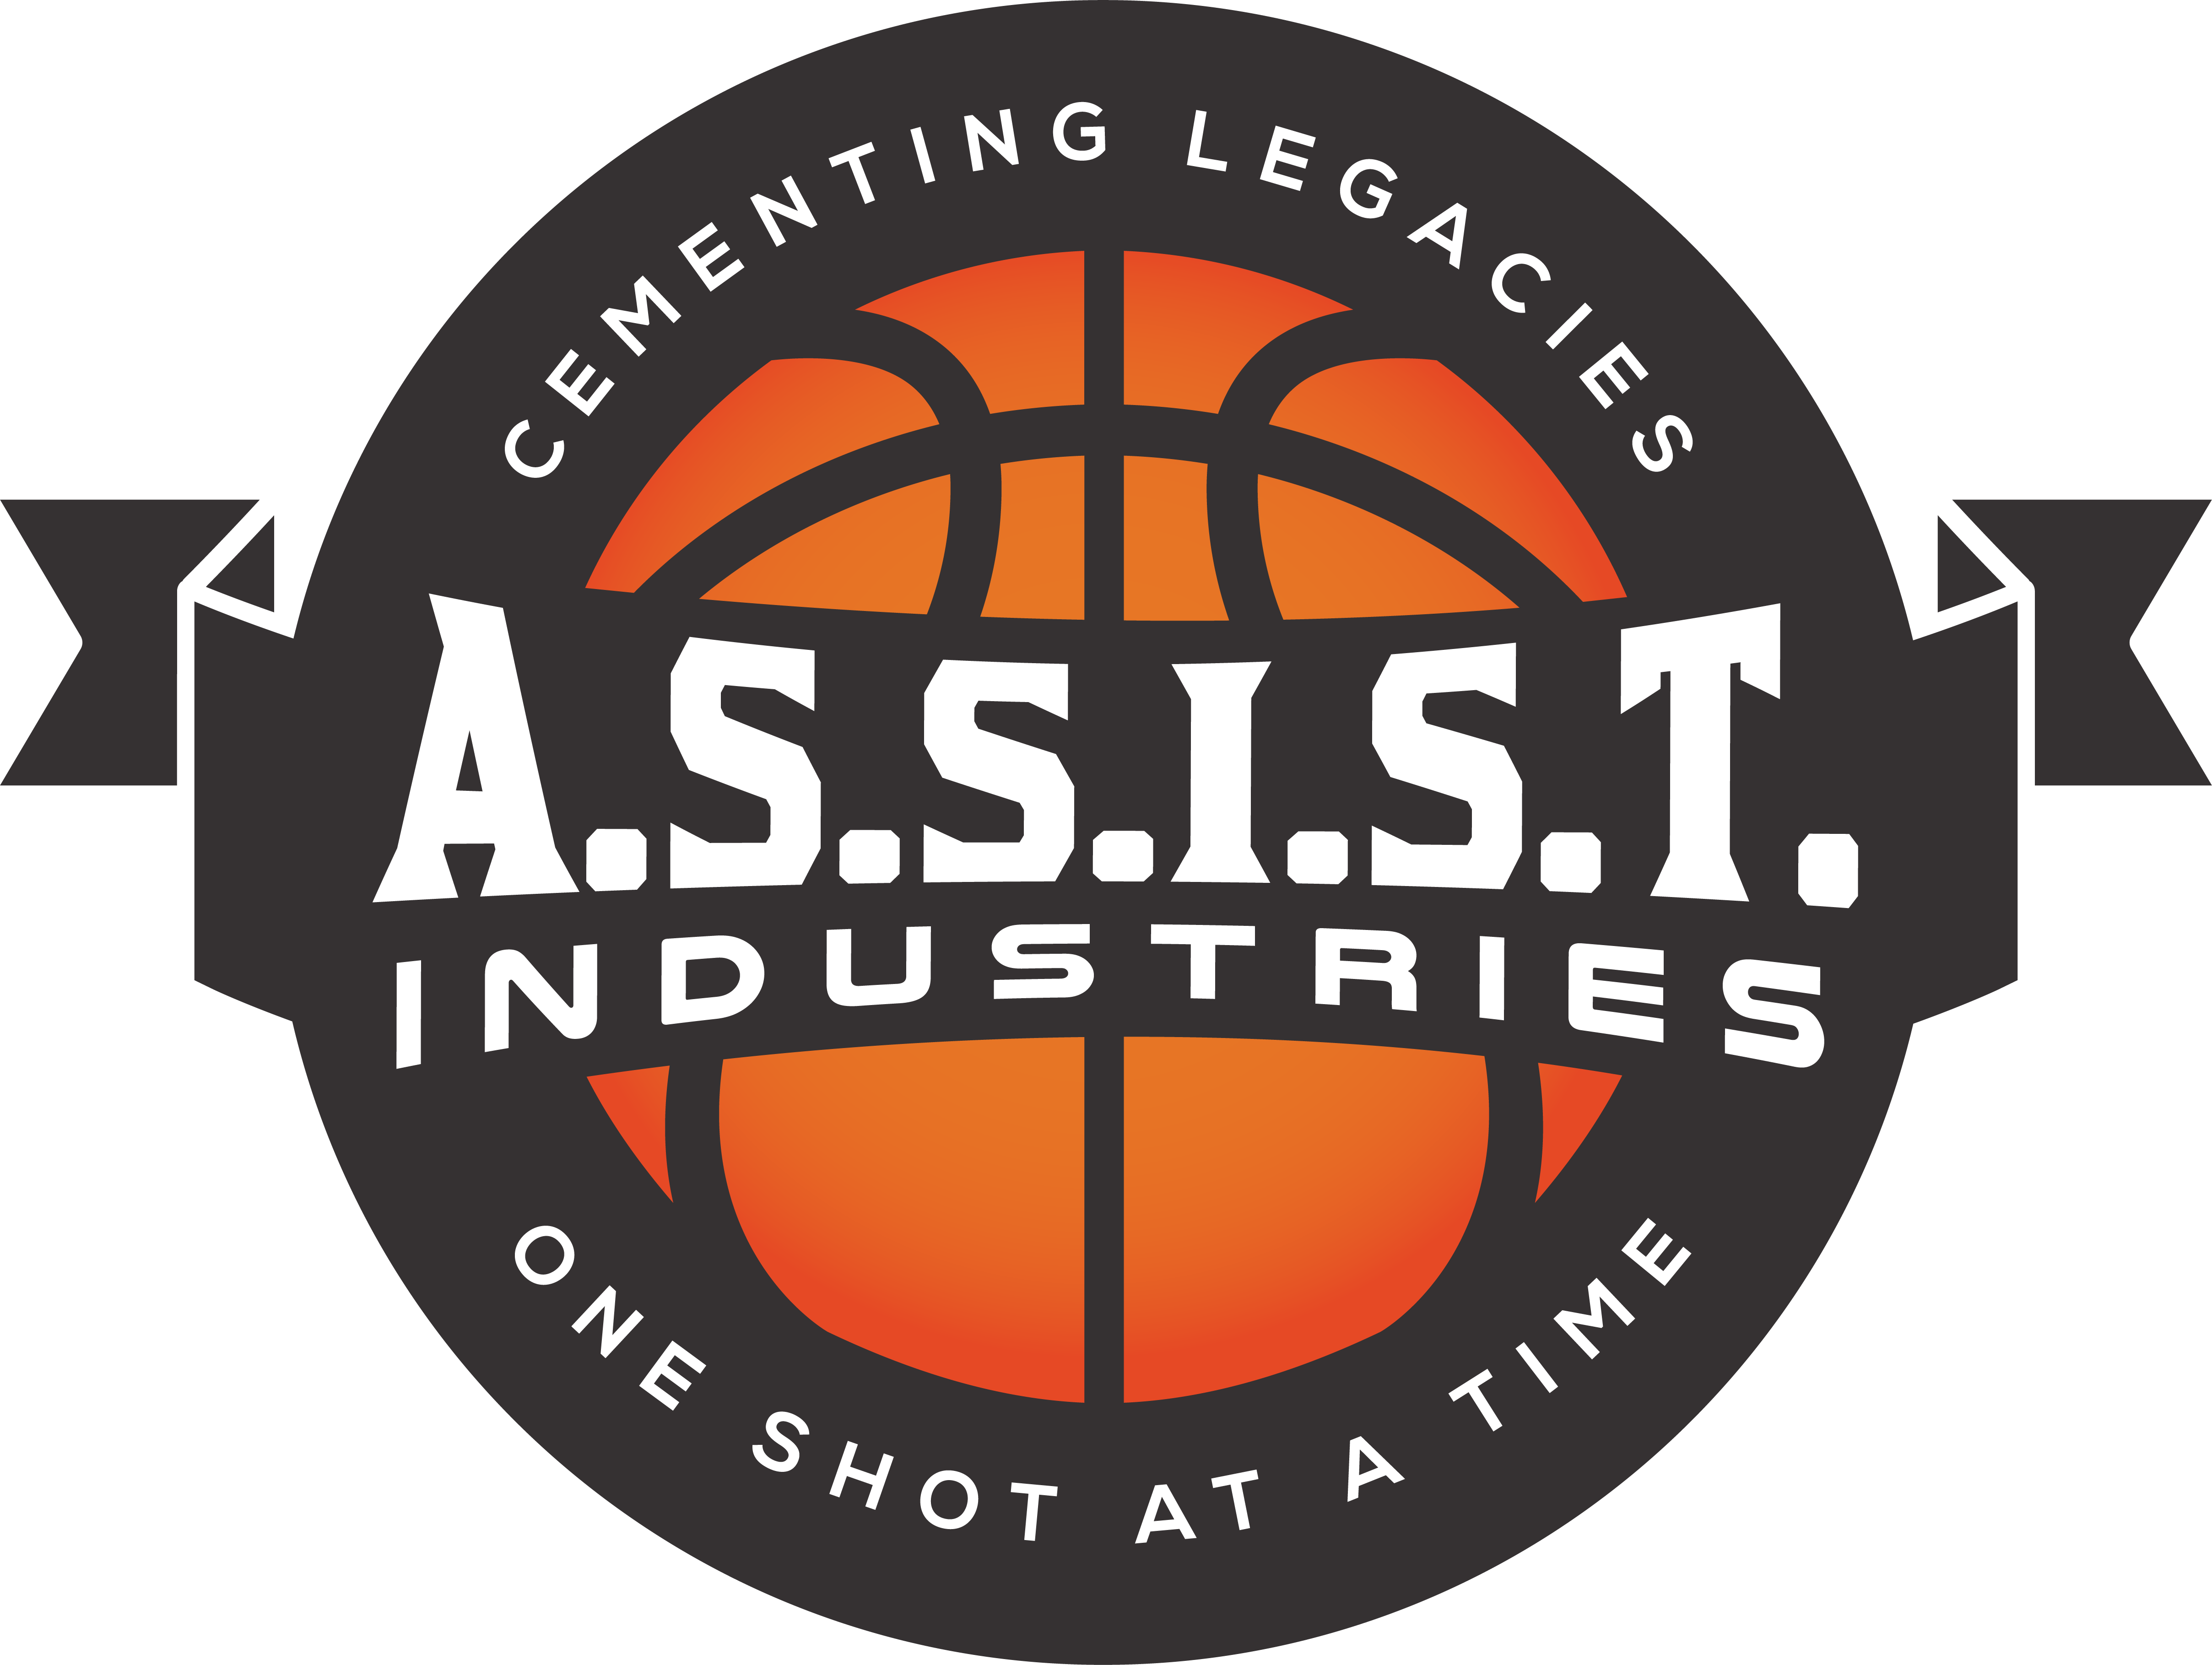 Assist Industries is a sports training business in Laveen offering youth expert advise on basketball.